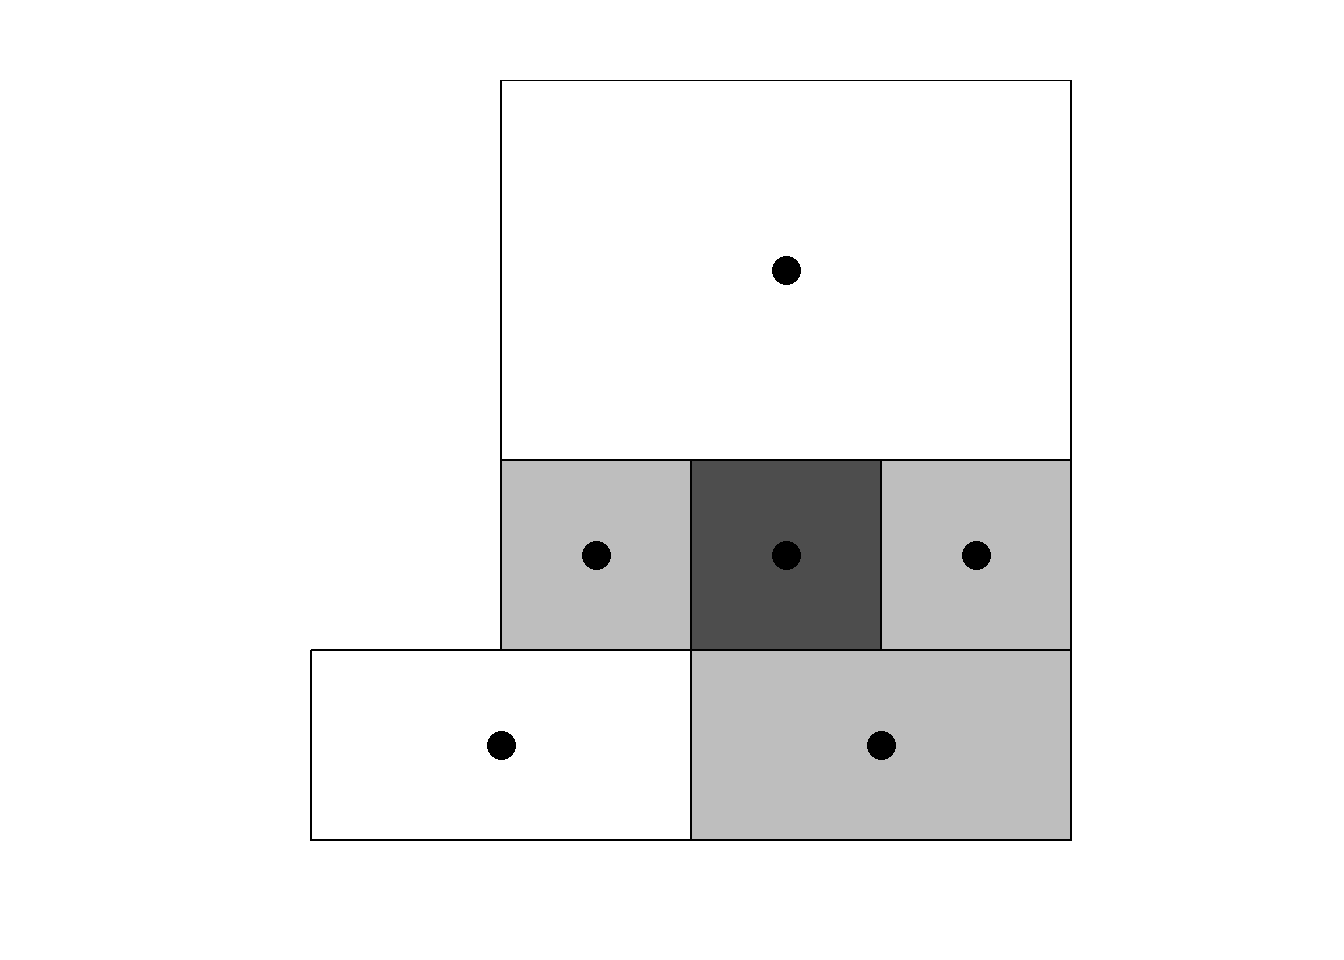 Left: Neighbors based on 3 nearest neighbors. Area of interest is represented in black and its neighbors in gray. Right: Map of neighbors based on 3 nearest neighbors.